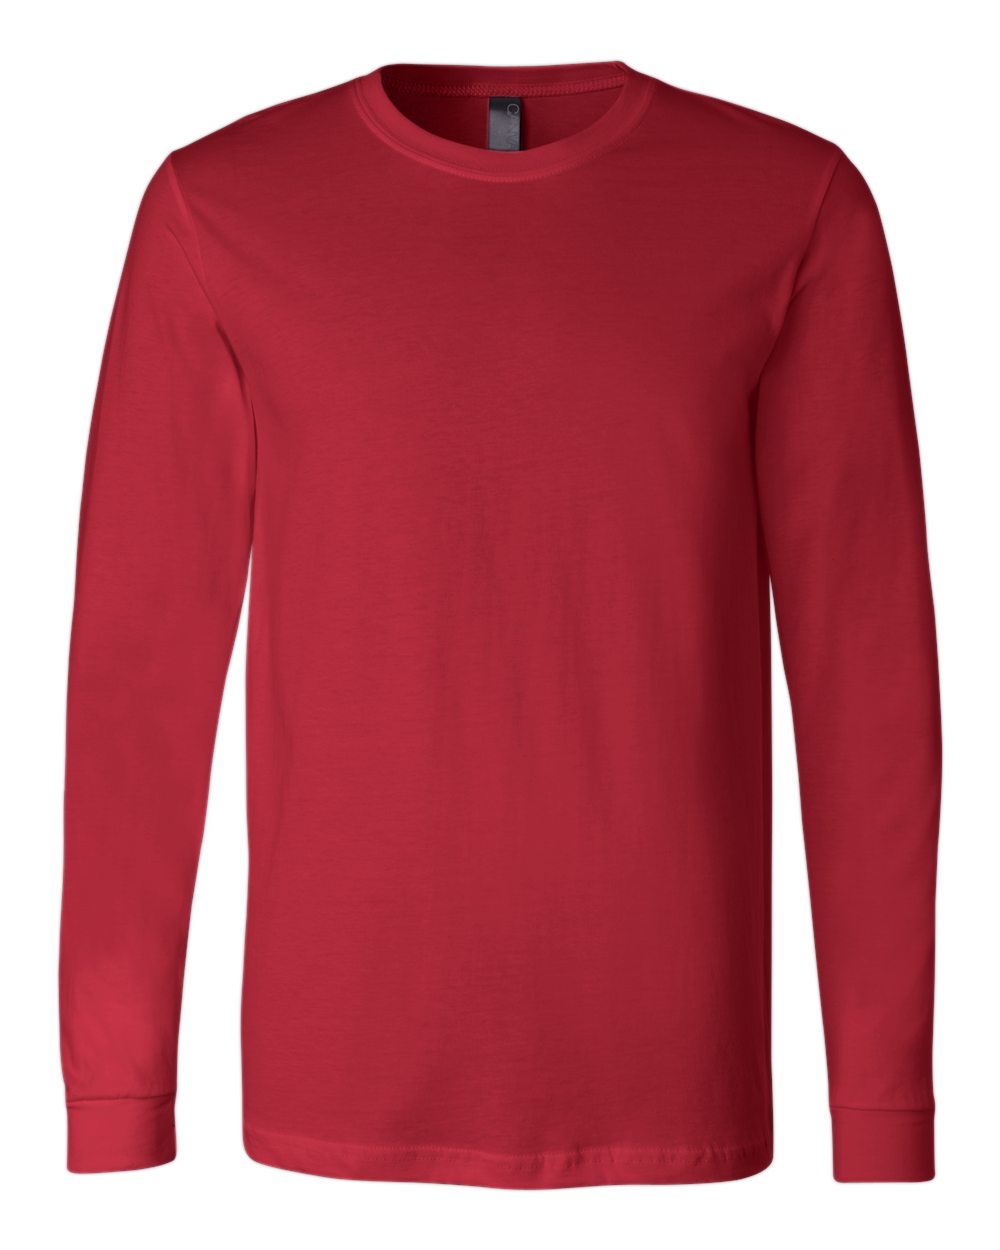 Bella + Canvas Long Sleeve (3501) in Red